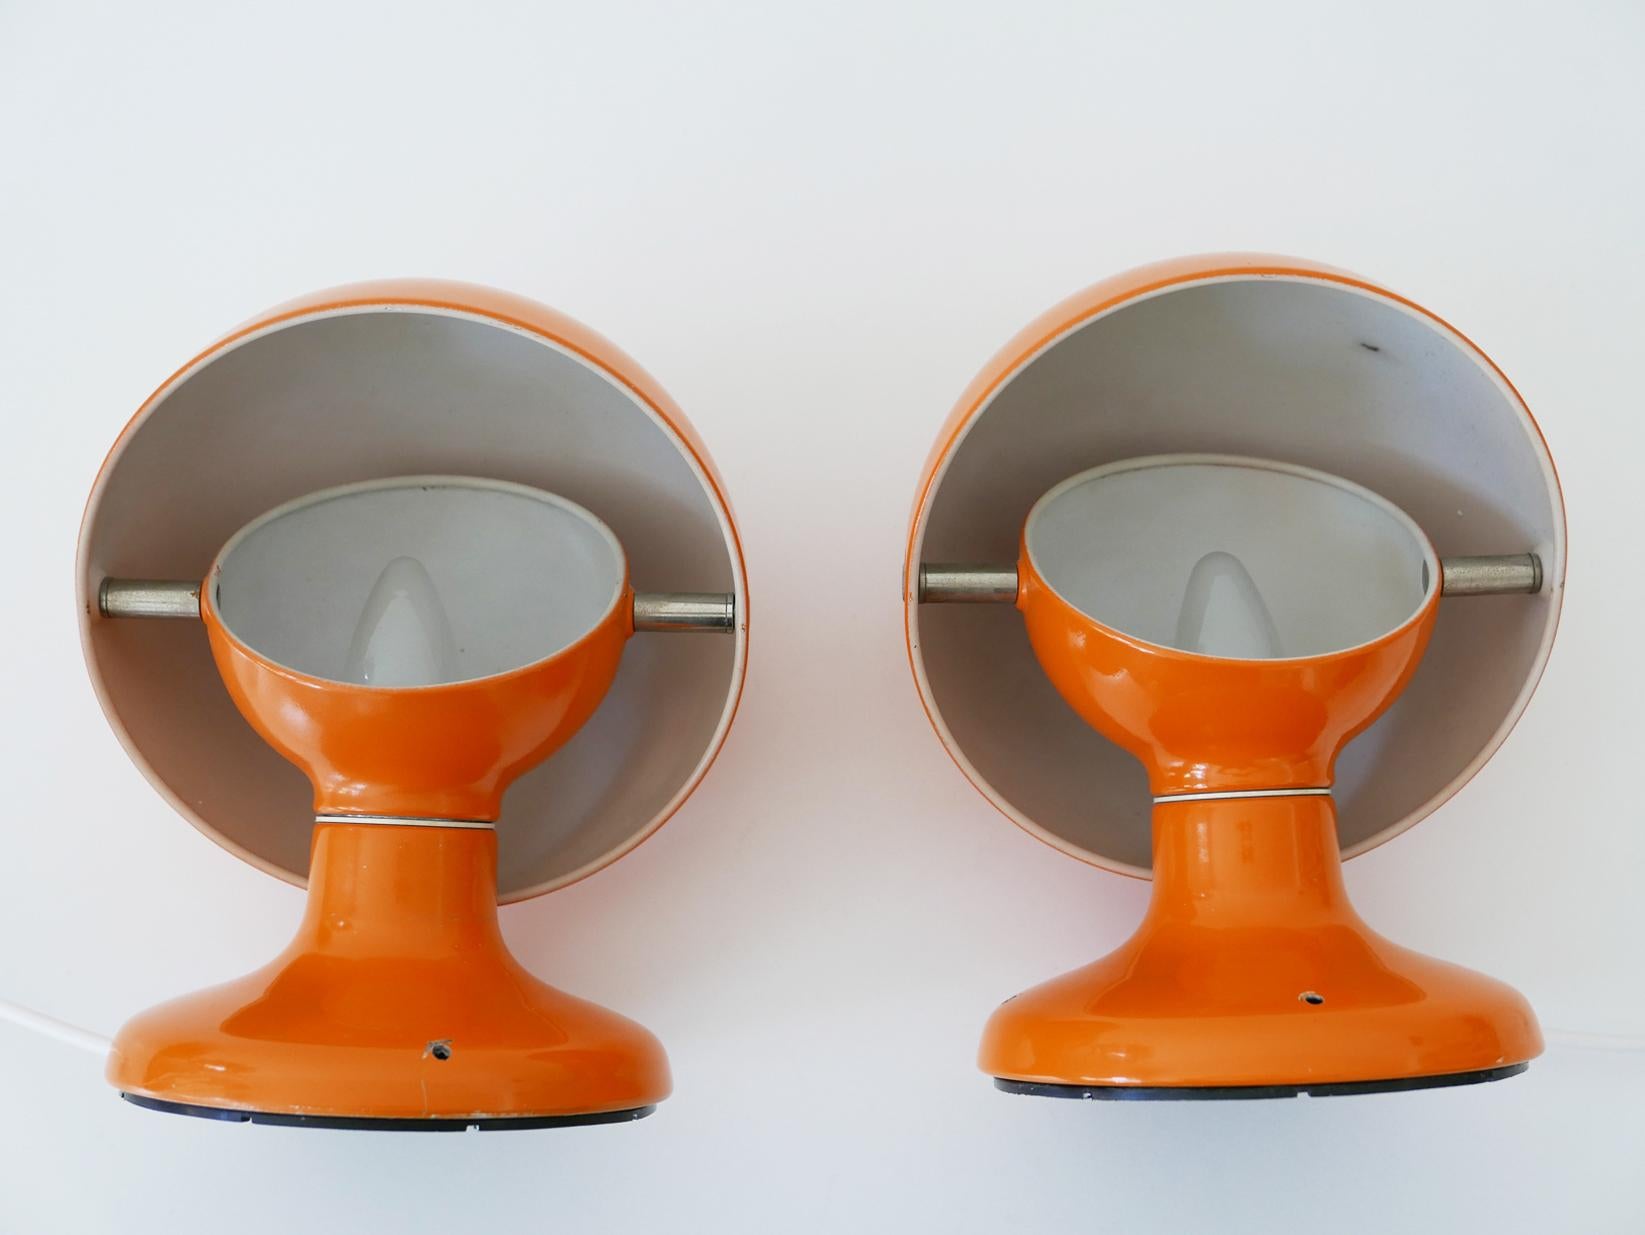 Pair of Mid-Century Modern Jucker Table Lamps by Afra & Tobia Scarpa, 1960s For Sale 7